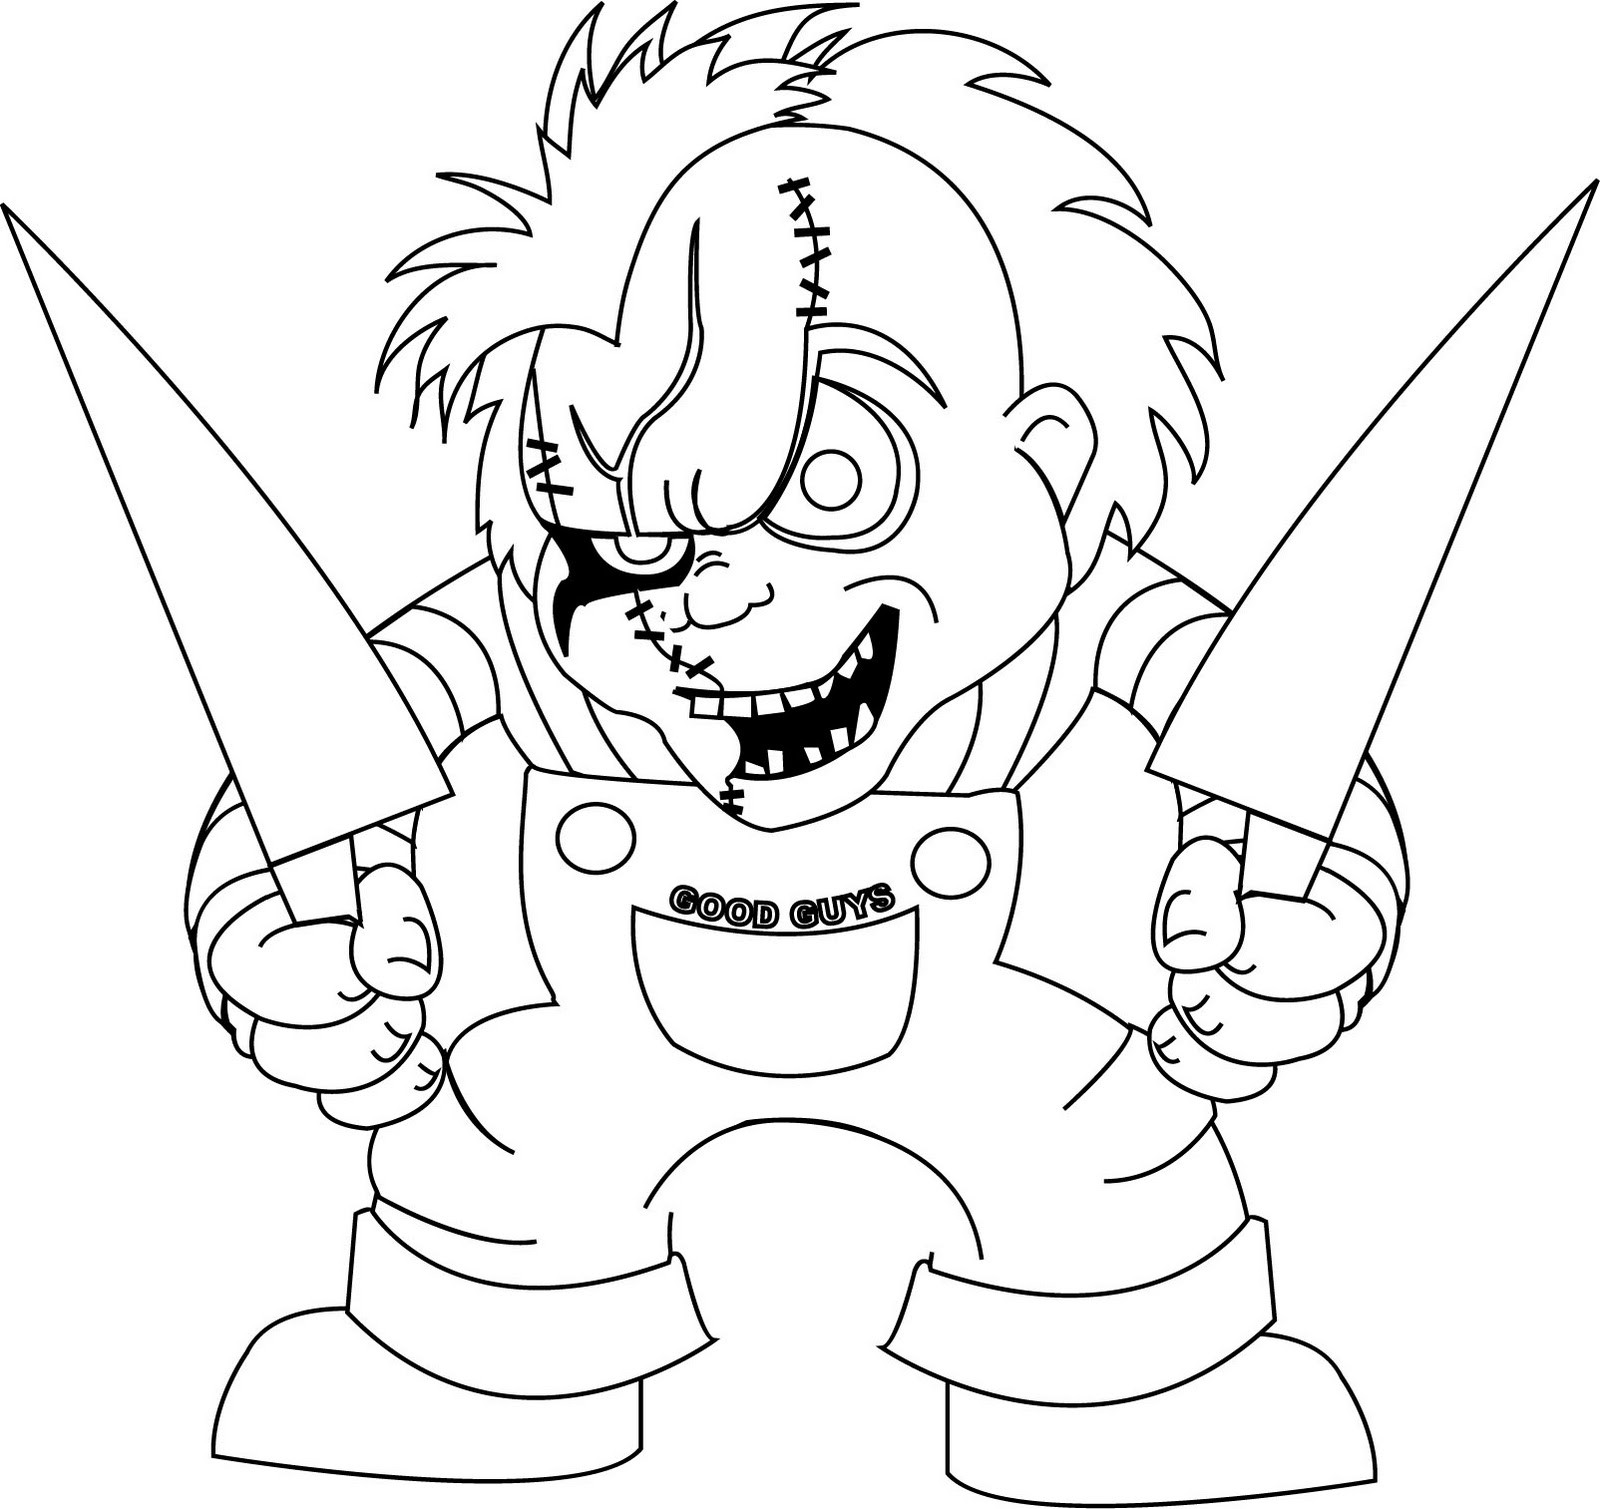 Chucky Coloring Pages
 Chucky Free Coloring Pages